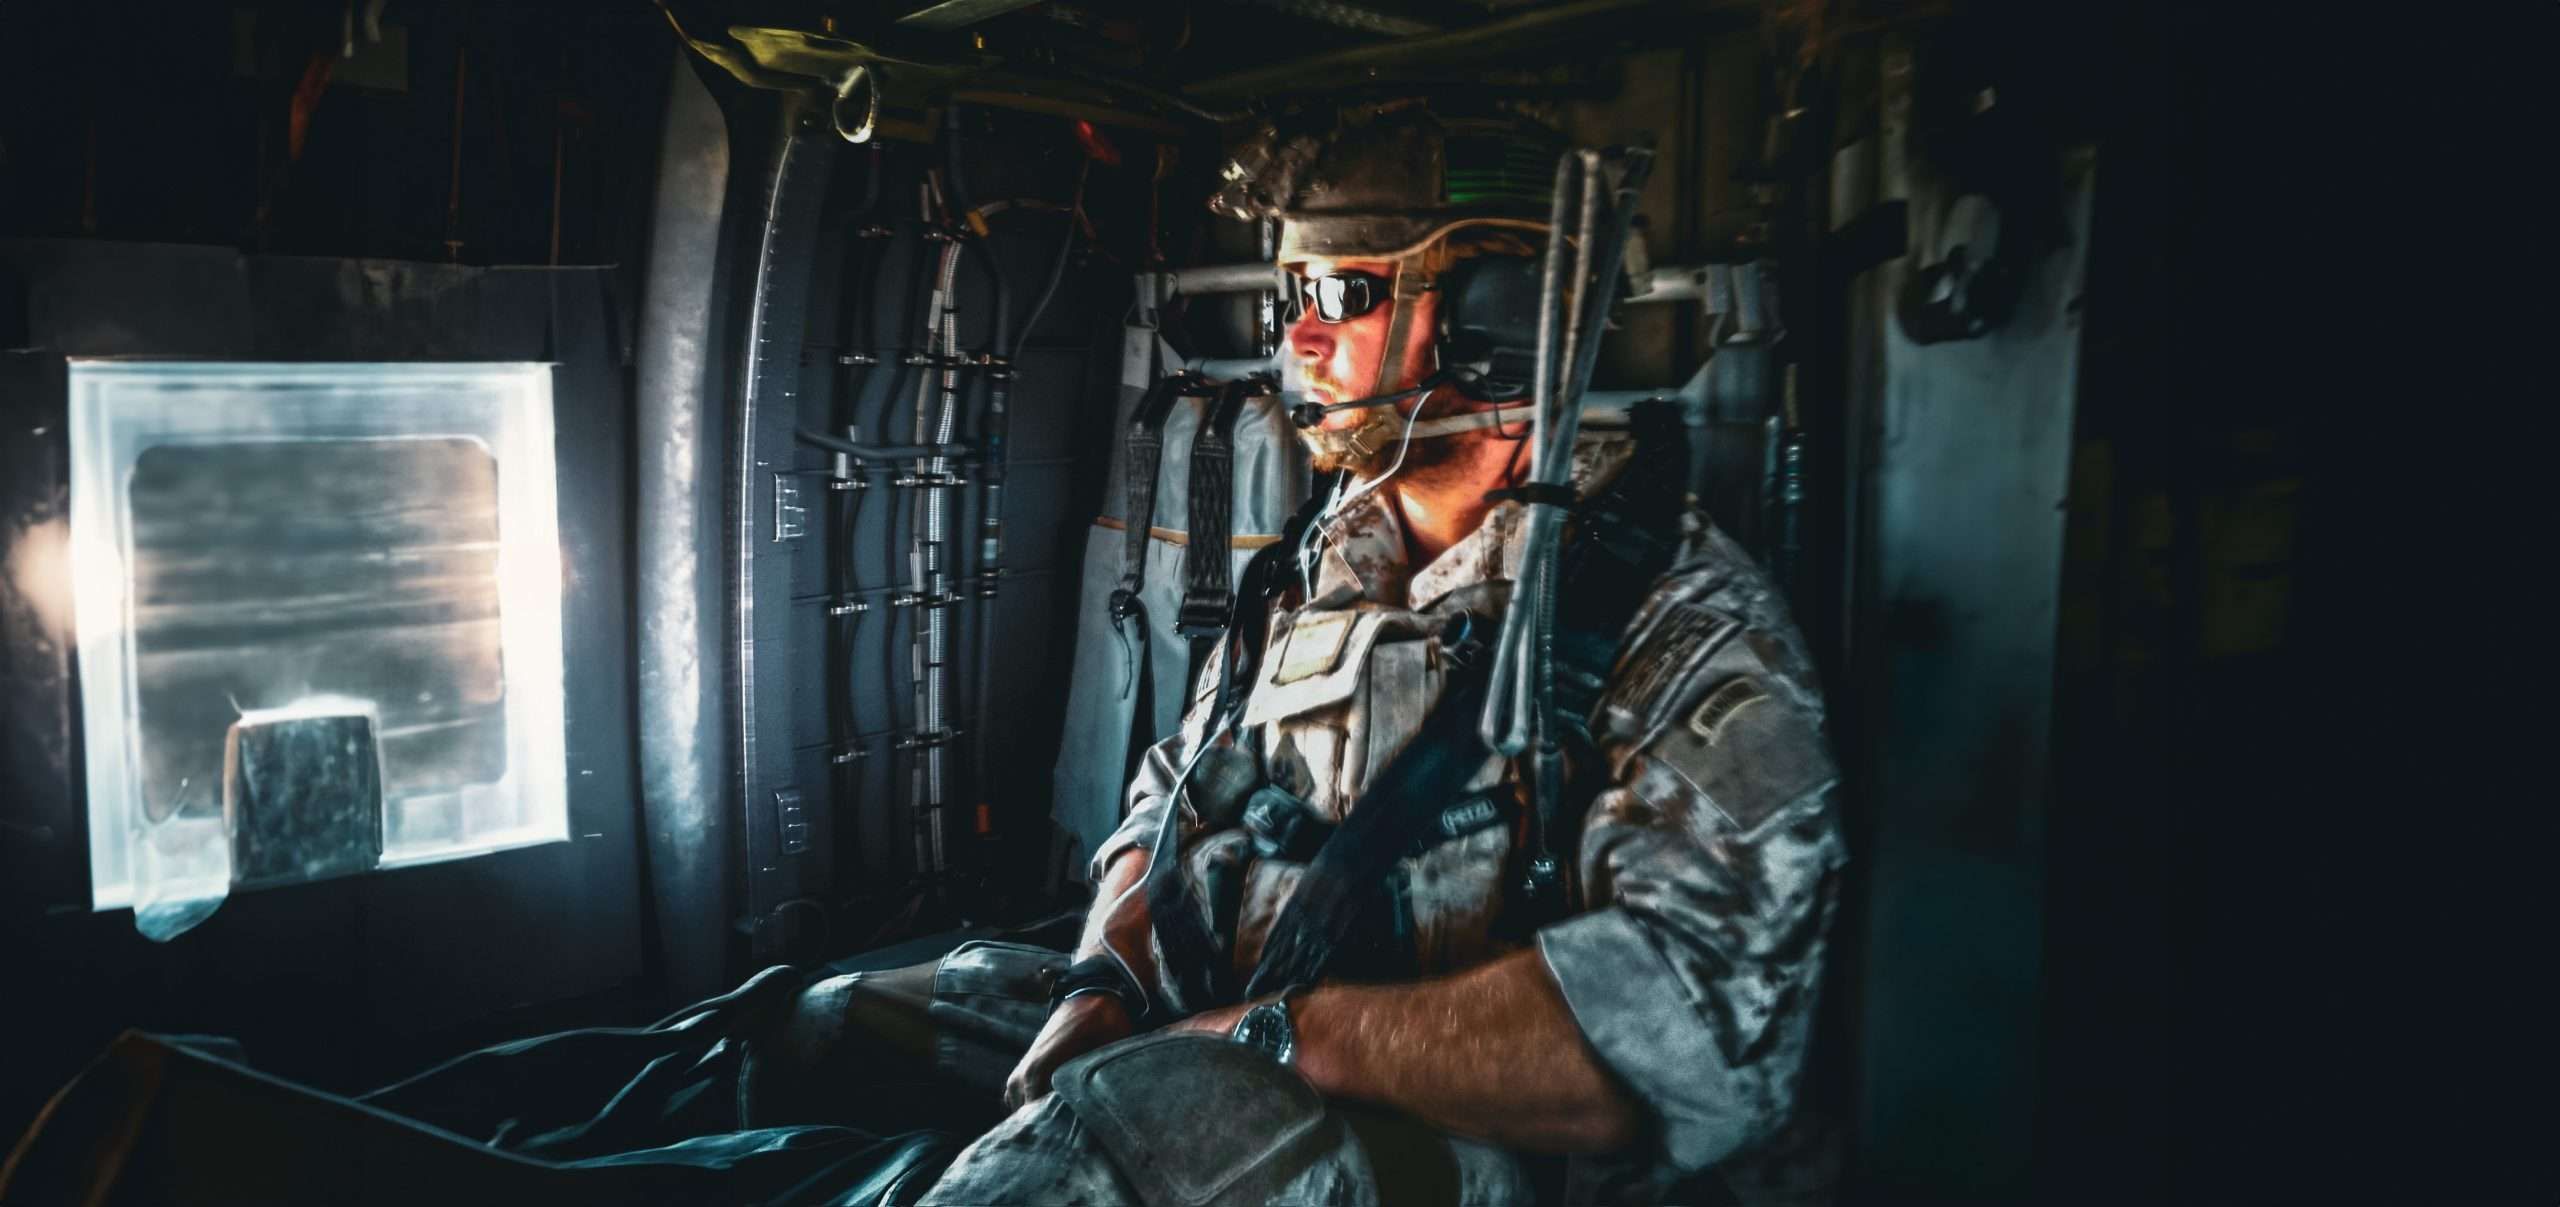 Purple heart recipient, Navy Seal officer, Tim Sheehy in military combat gear aboard a helicopter.